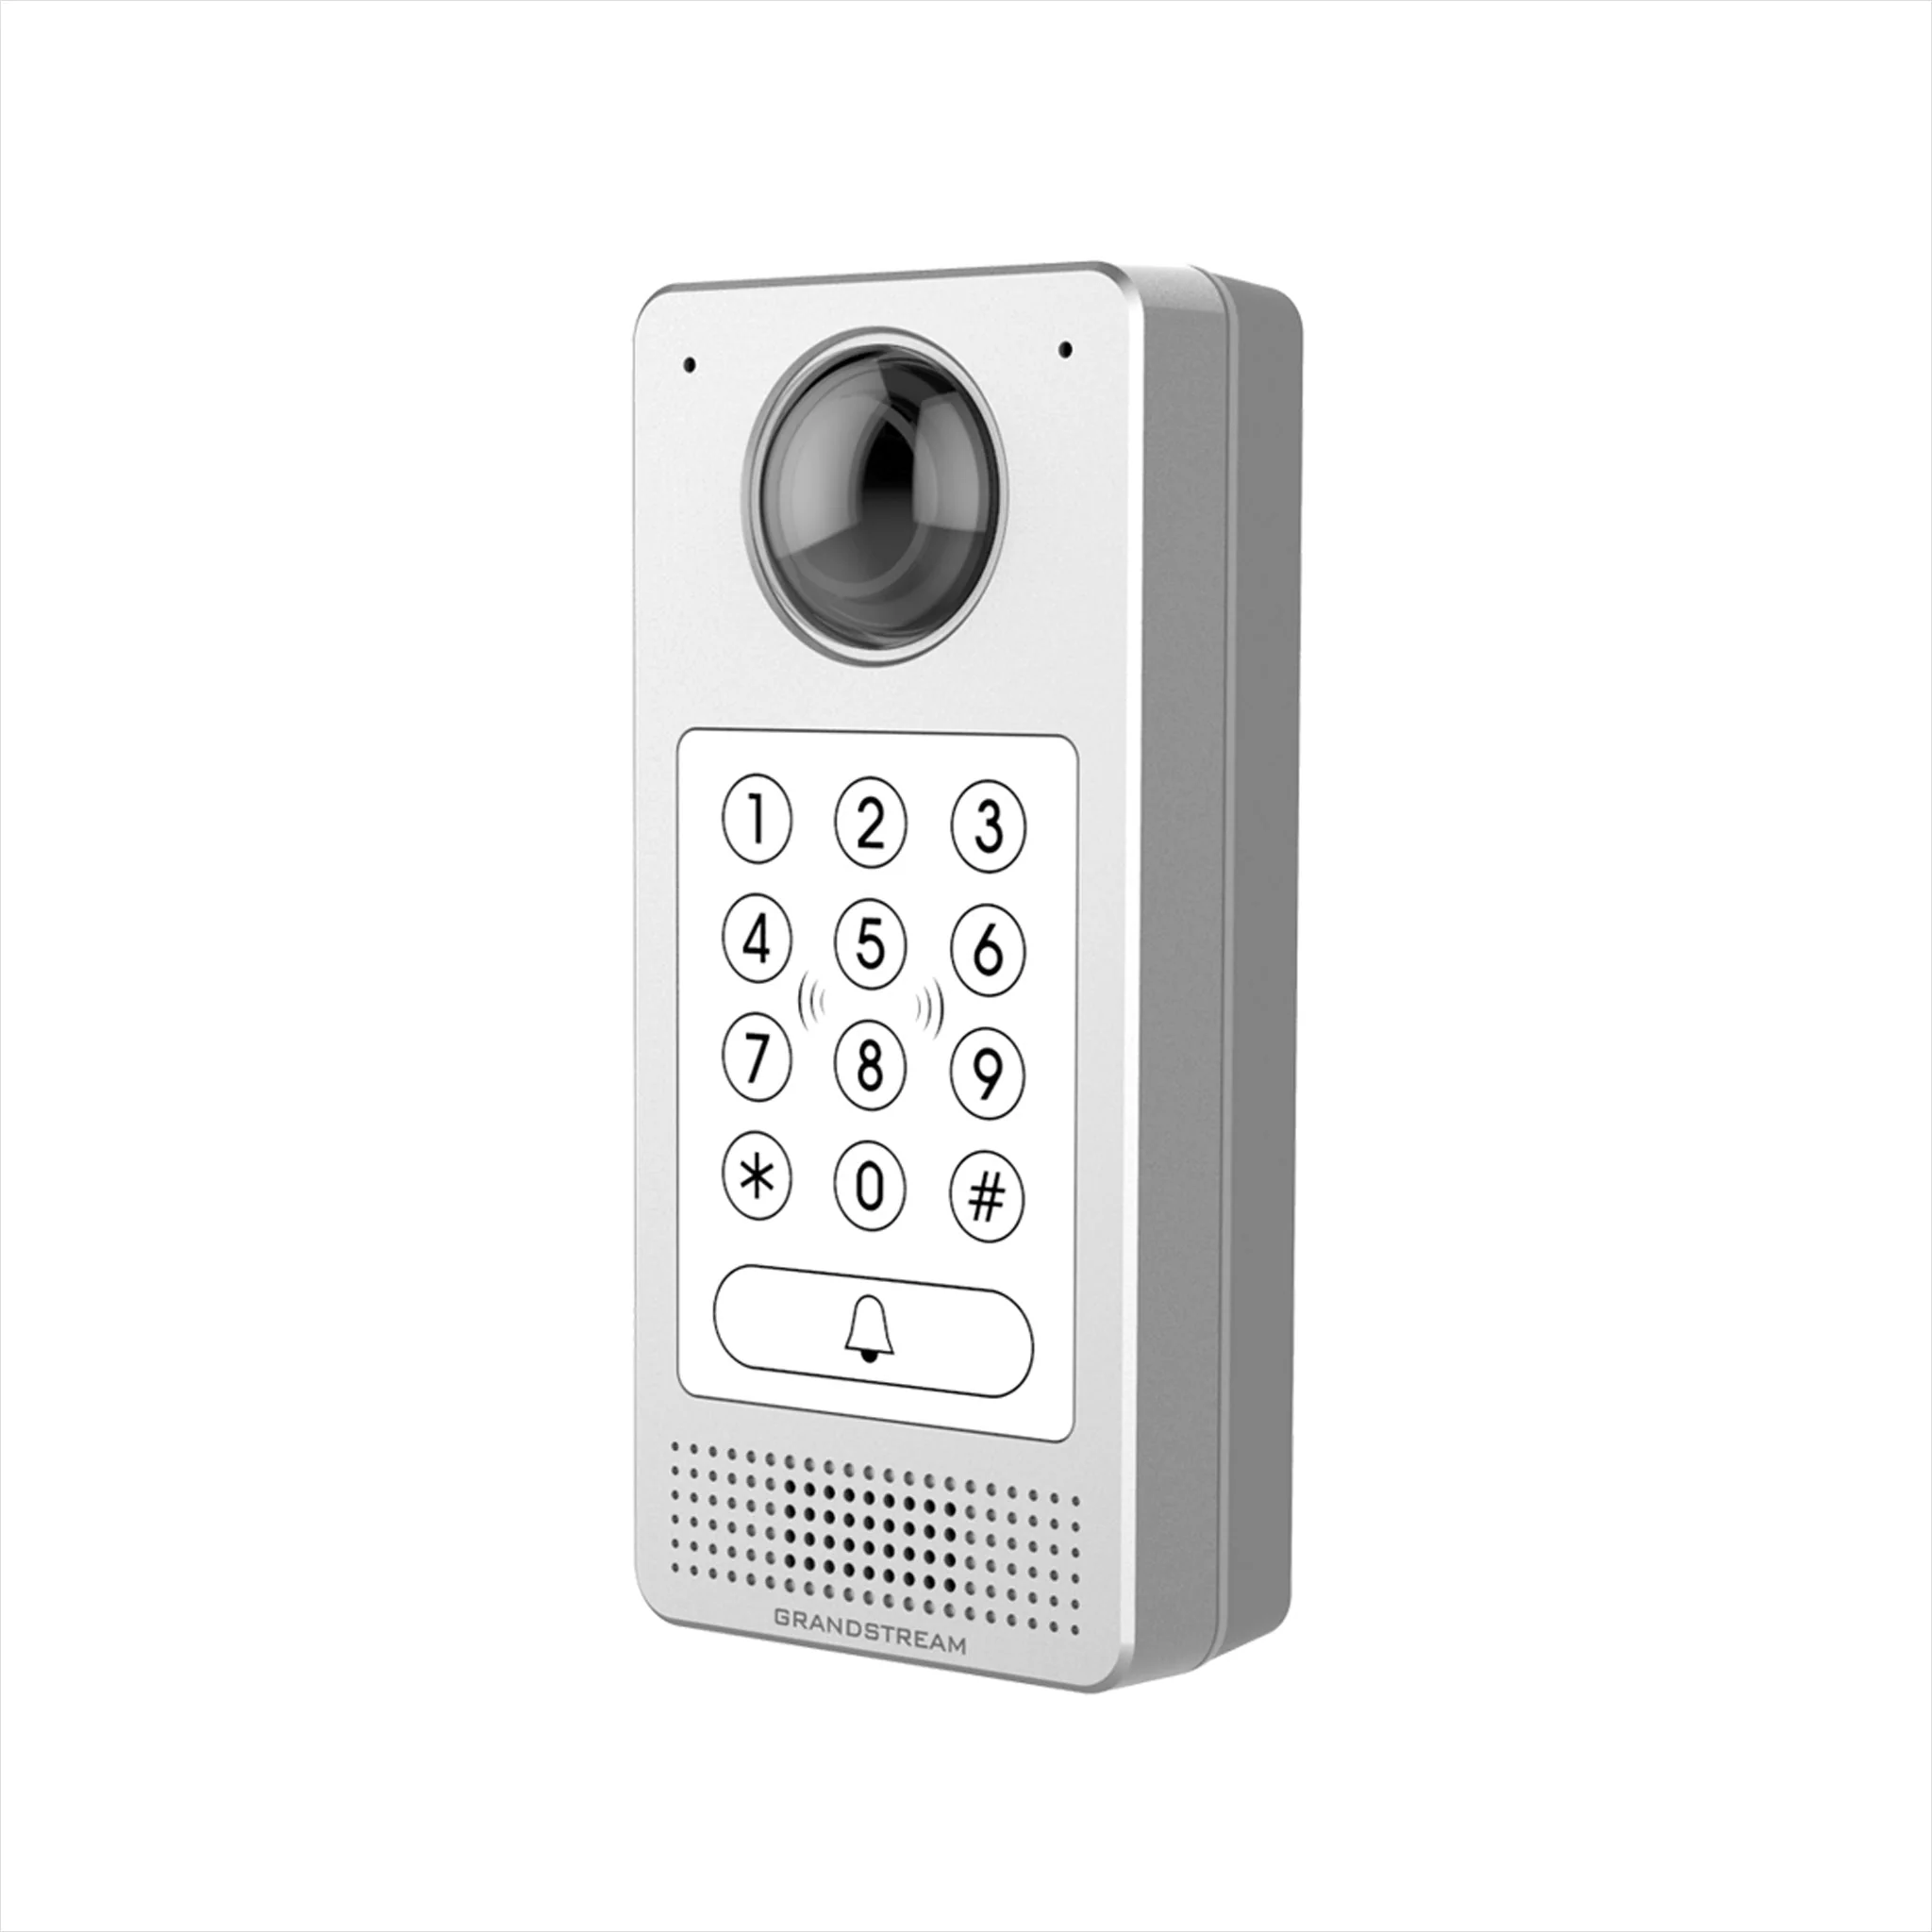 Grandstream-GDS3710-IP-Video-Door-Entry-System view a